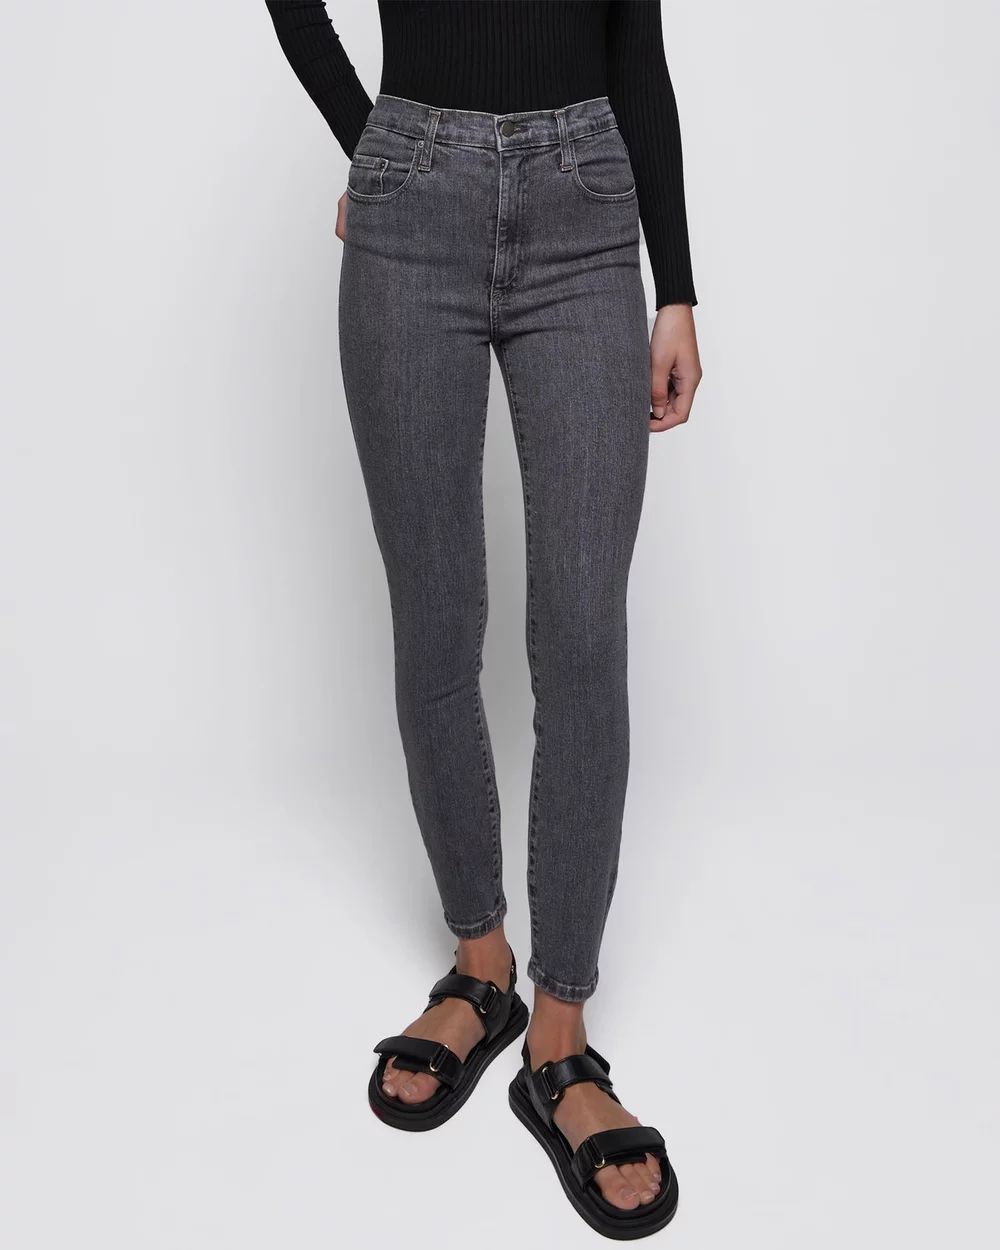 Siren Skinny Ankle Jeans | THE ICONIC (AU & NZ)